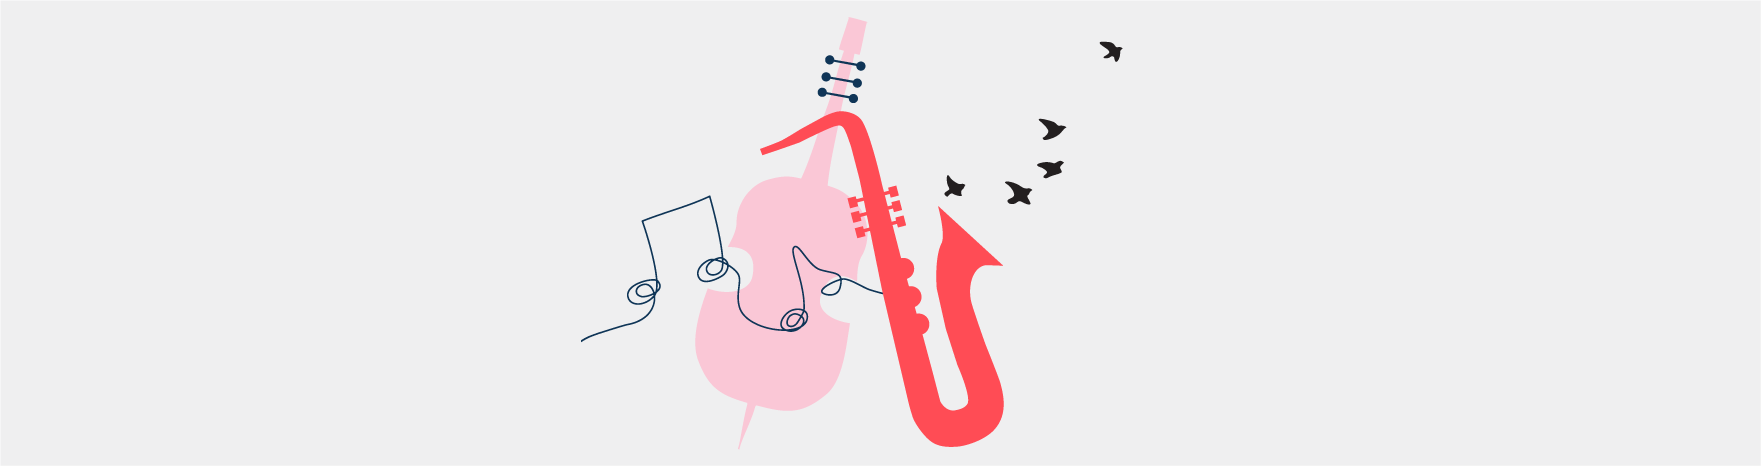 A creative illustration featuring a pink saxophone with a keyboard and guitar neck integrated into its design. Musical notes float from the bell of the saxophone, symbolizing sound, while small black birds appear to fly away, adding a sense of freedom and nature to the artwork. The background is a simple, clean white, emphasizing the boldness of the musical elements.